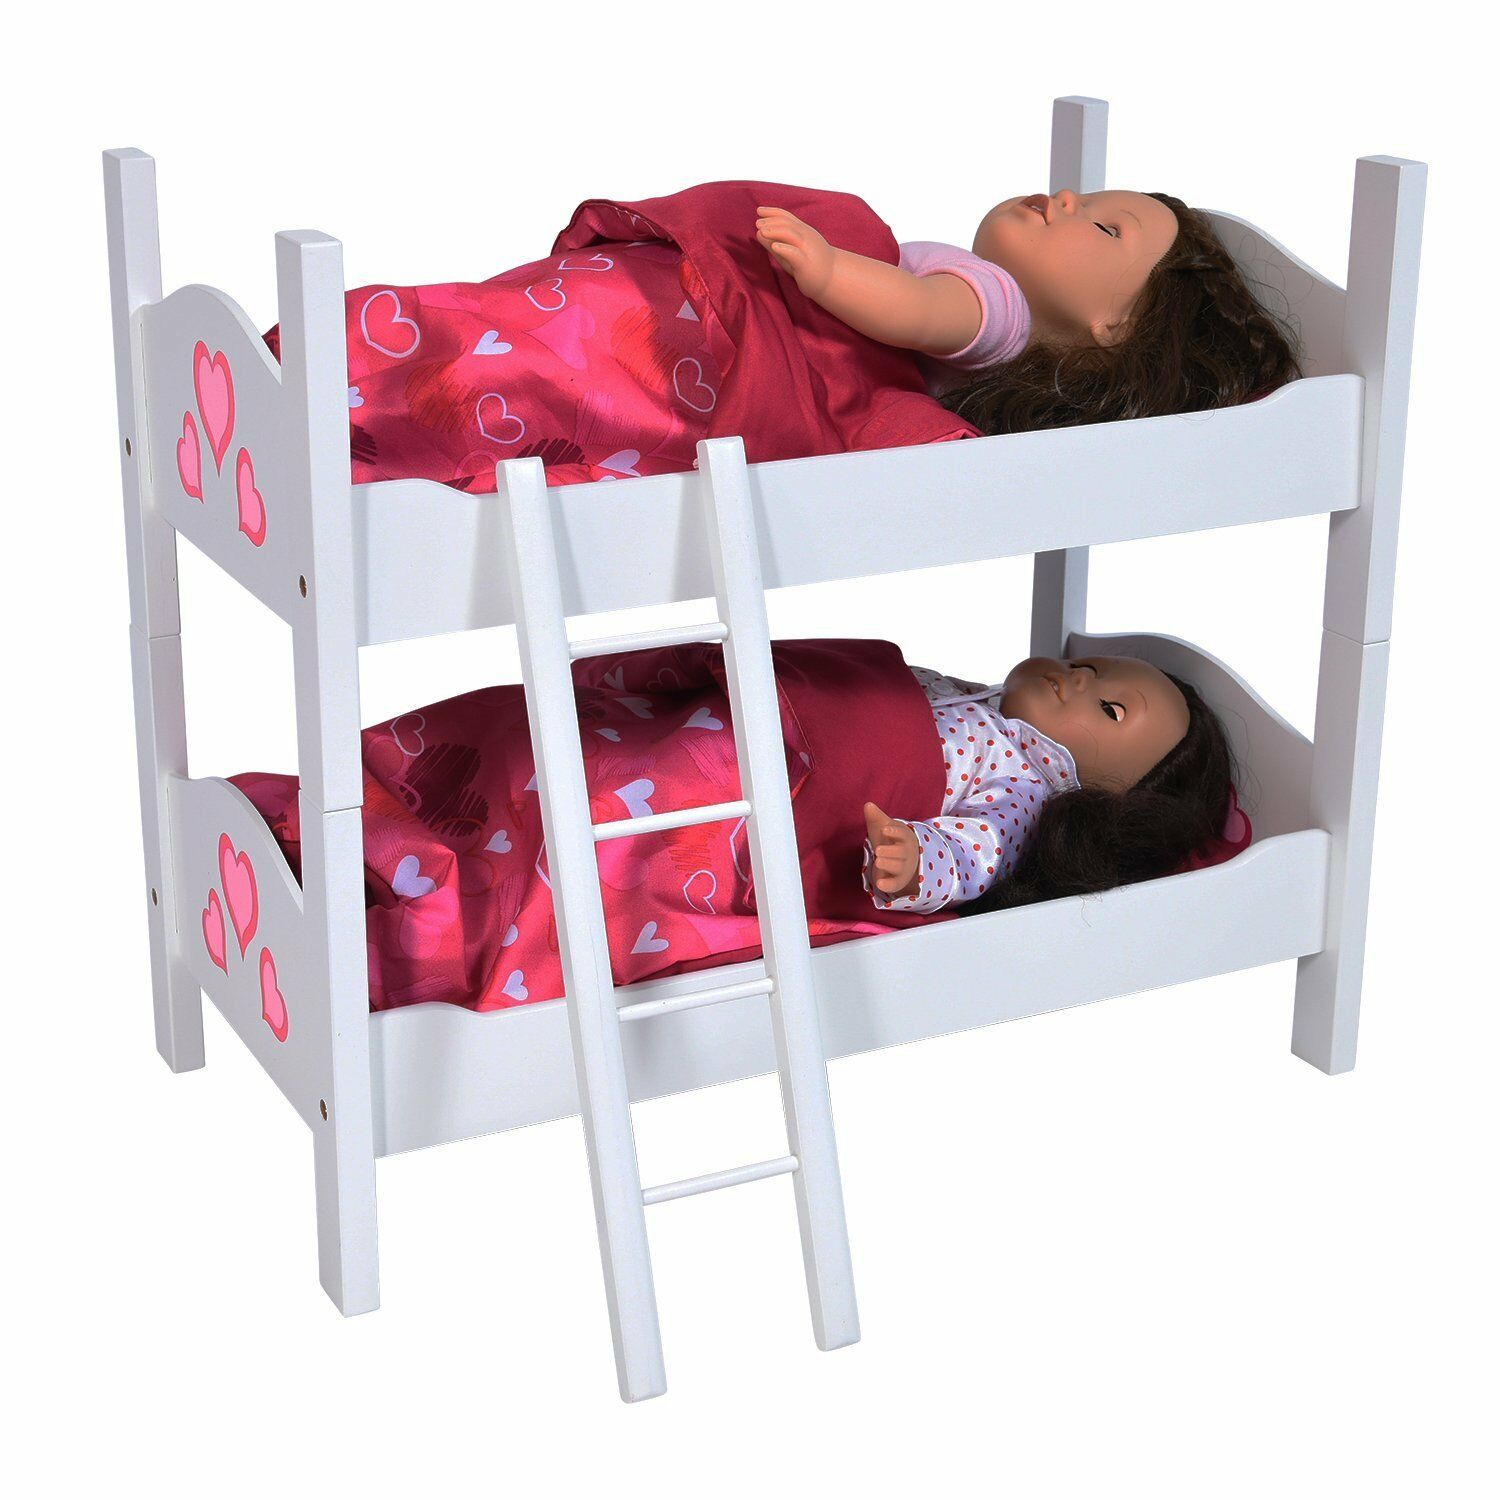 Bunk Bed For Twin Dolls Fits For 18 Inch Baby Dolls (latest Style) Super Quality